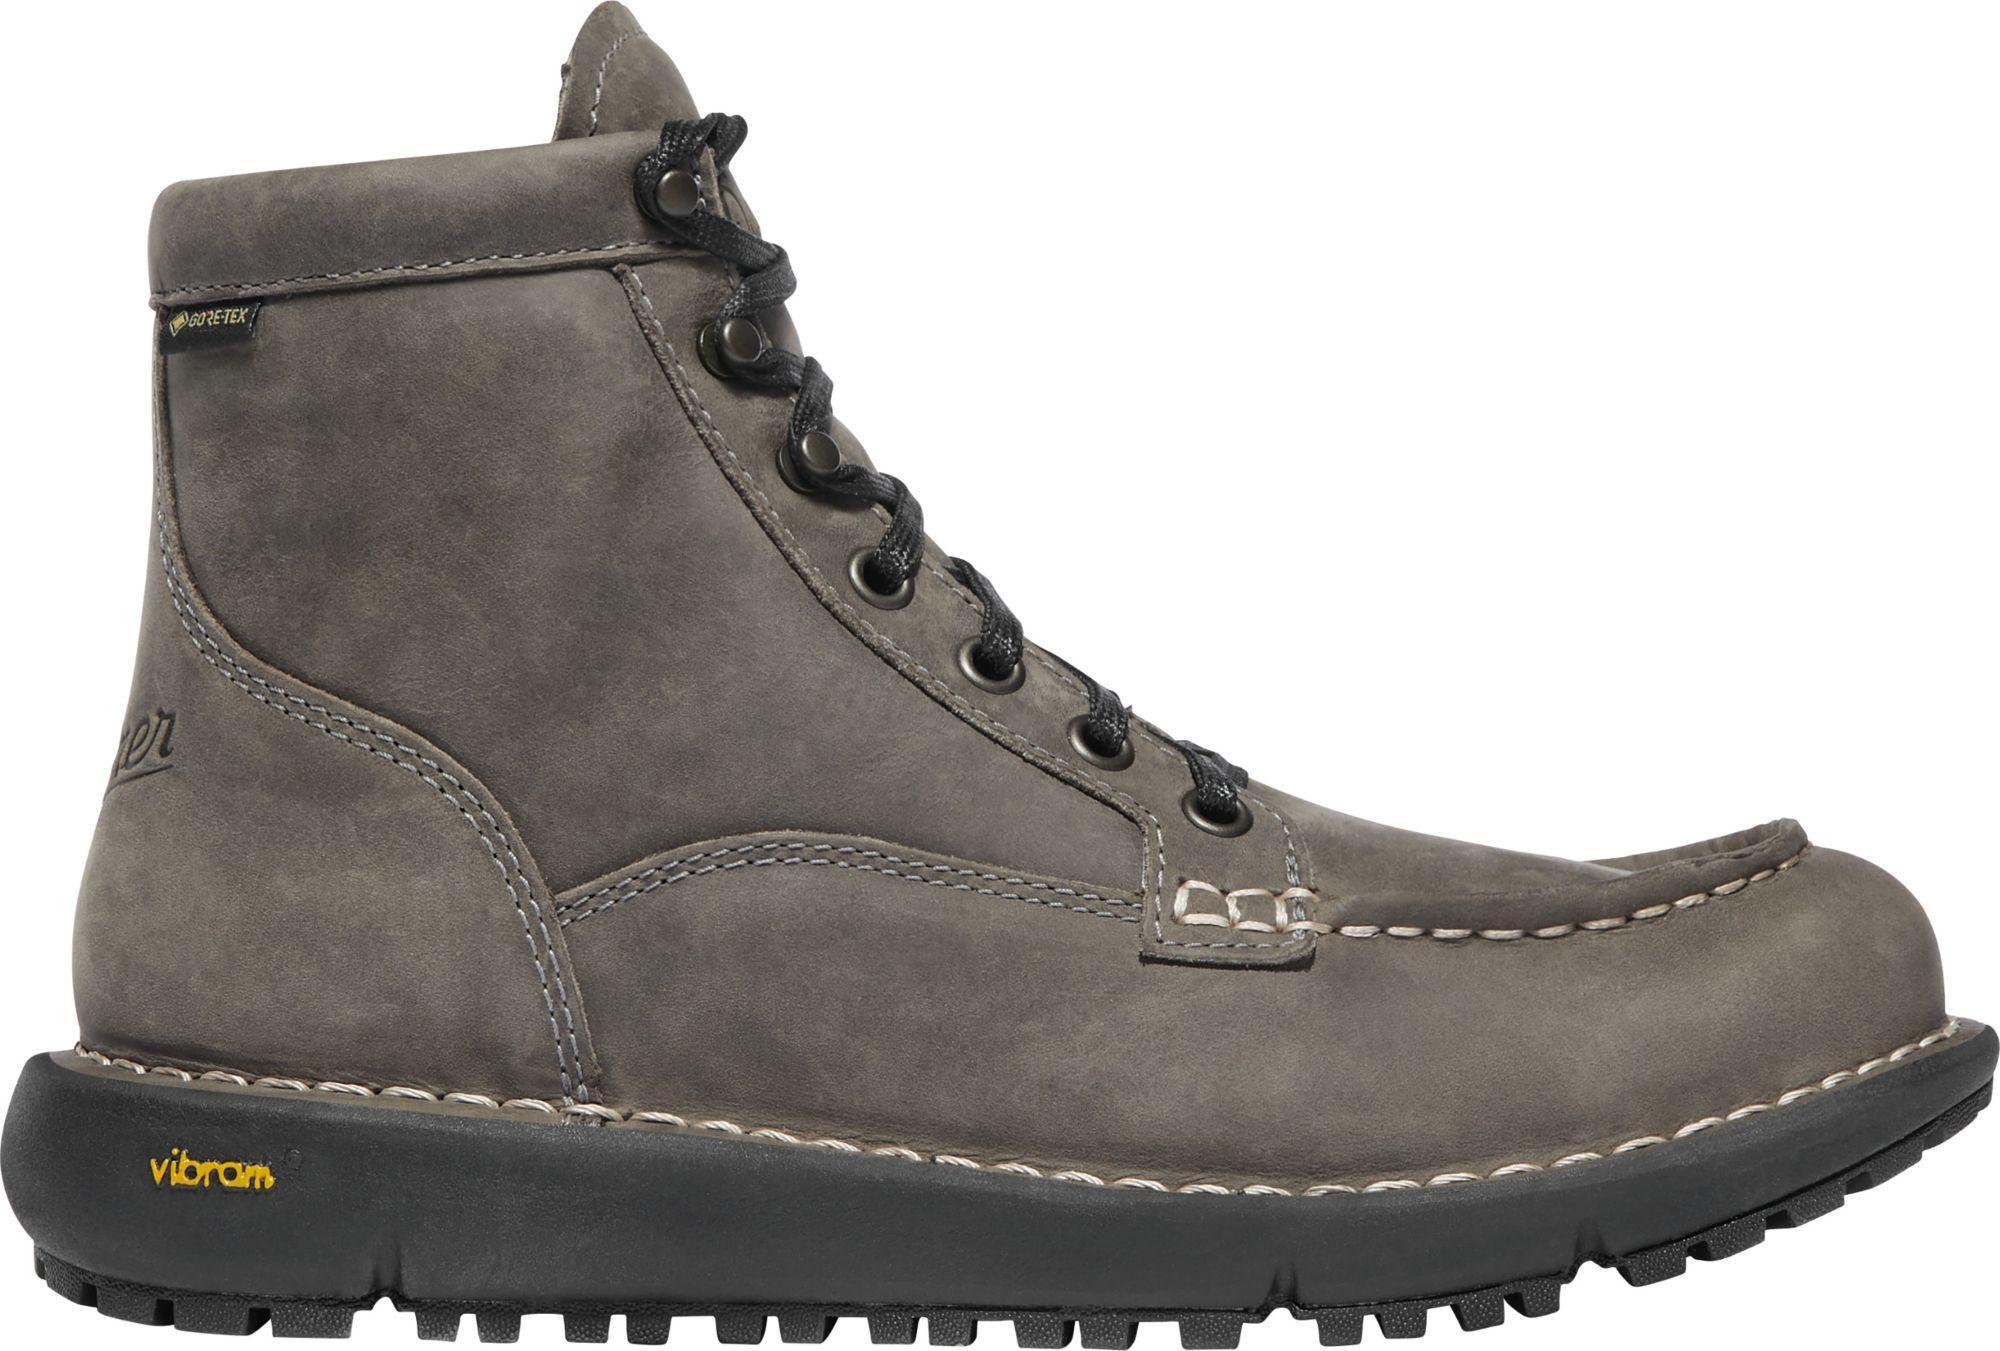 Danner Women's Logger Moc 917 6 Inch GTX Boot - 6M - Charcoal Product Image